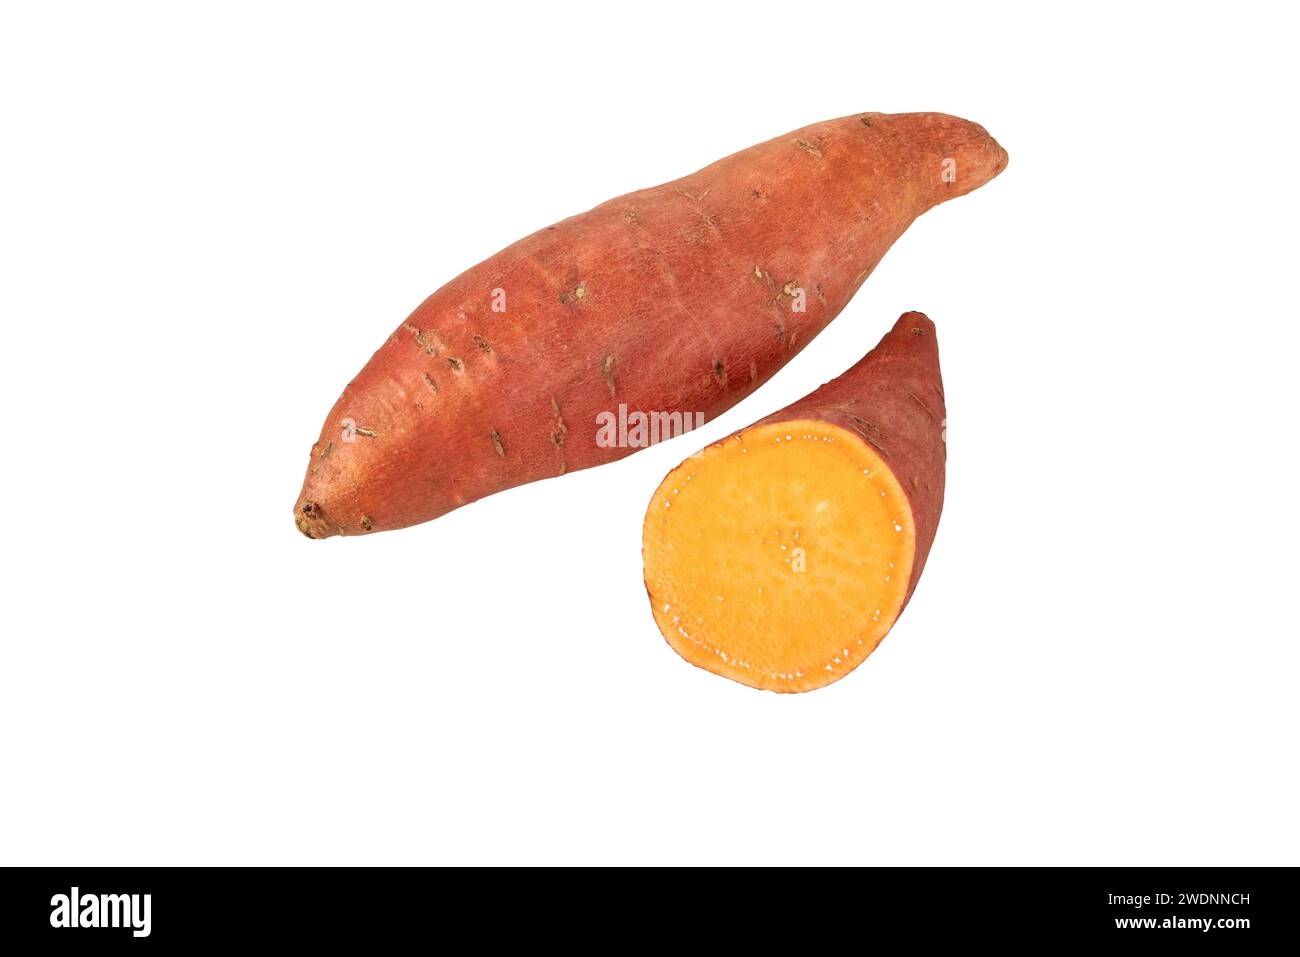 Sweet potato or sweetpotato whole and half tubes with red skin and yellow flesh isolated on white. Vegetable food staple. Stock Photo